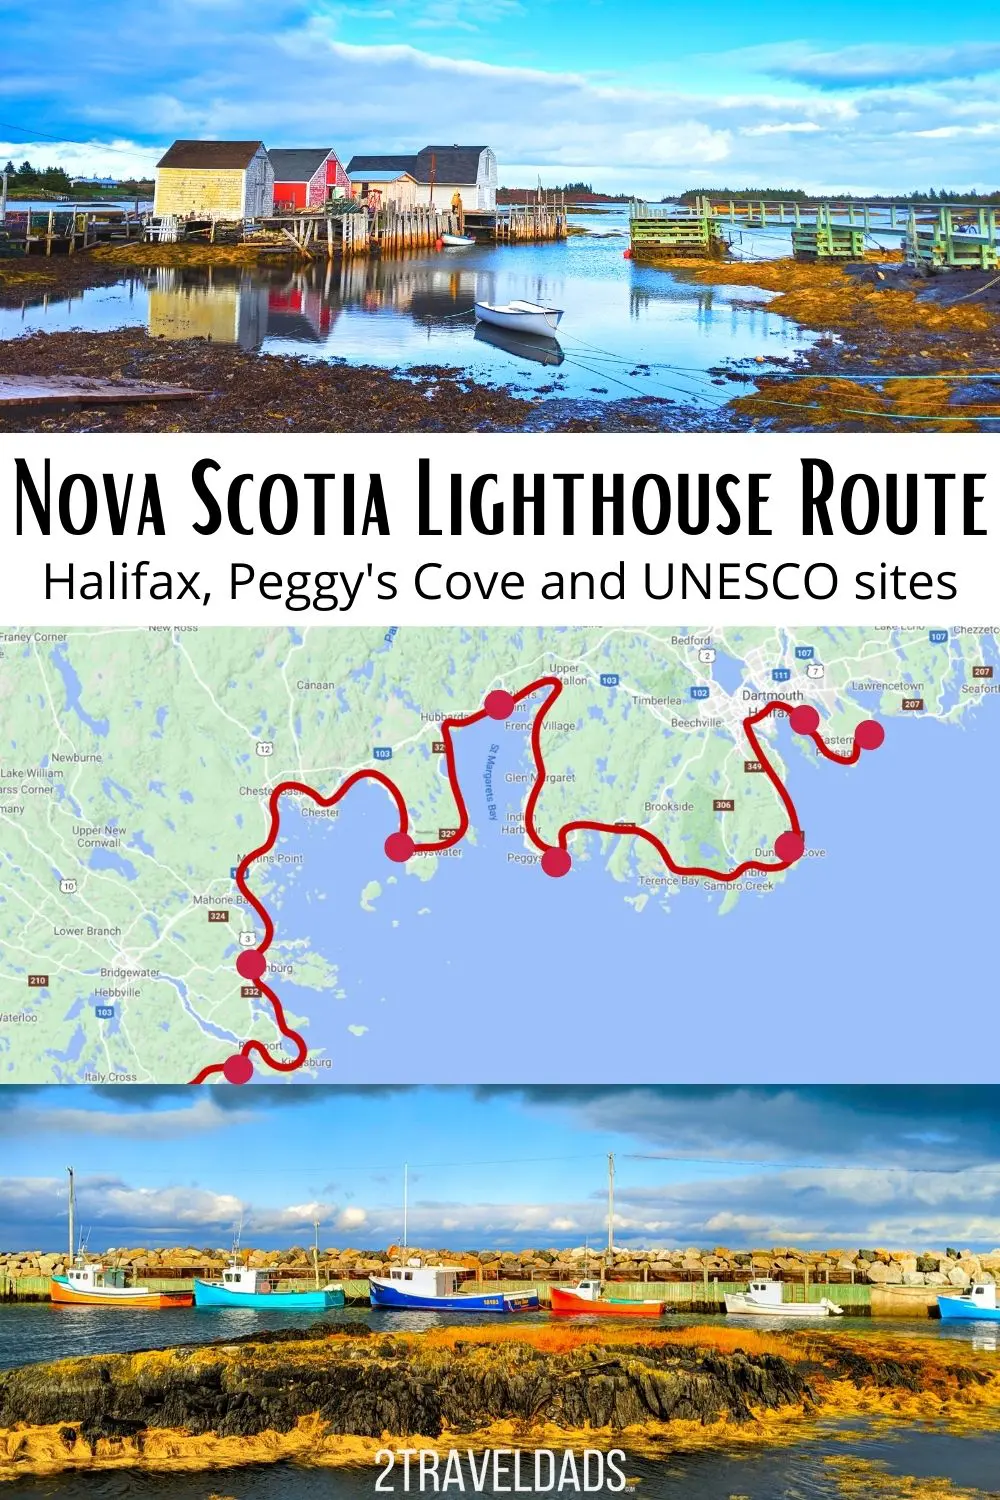 The best fall road trip we've done to date has been around Nova Scotia, and particularly the south shore along the Nova Scotia Lighthouse Route. Colorful towns and epic coastal wilderness make it unique and gorgeous.